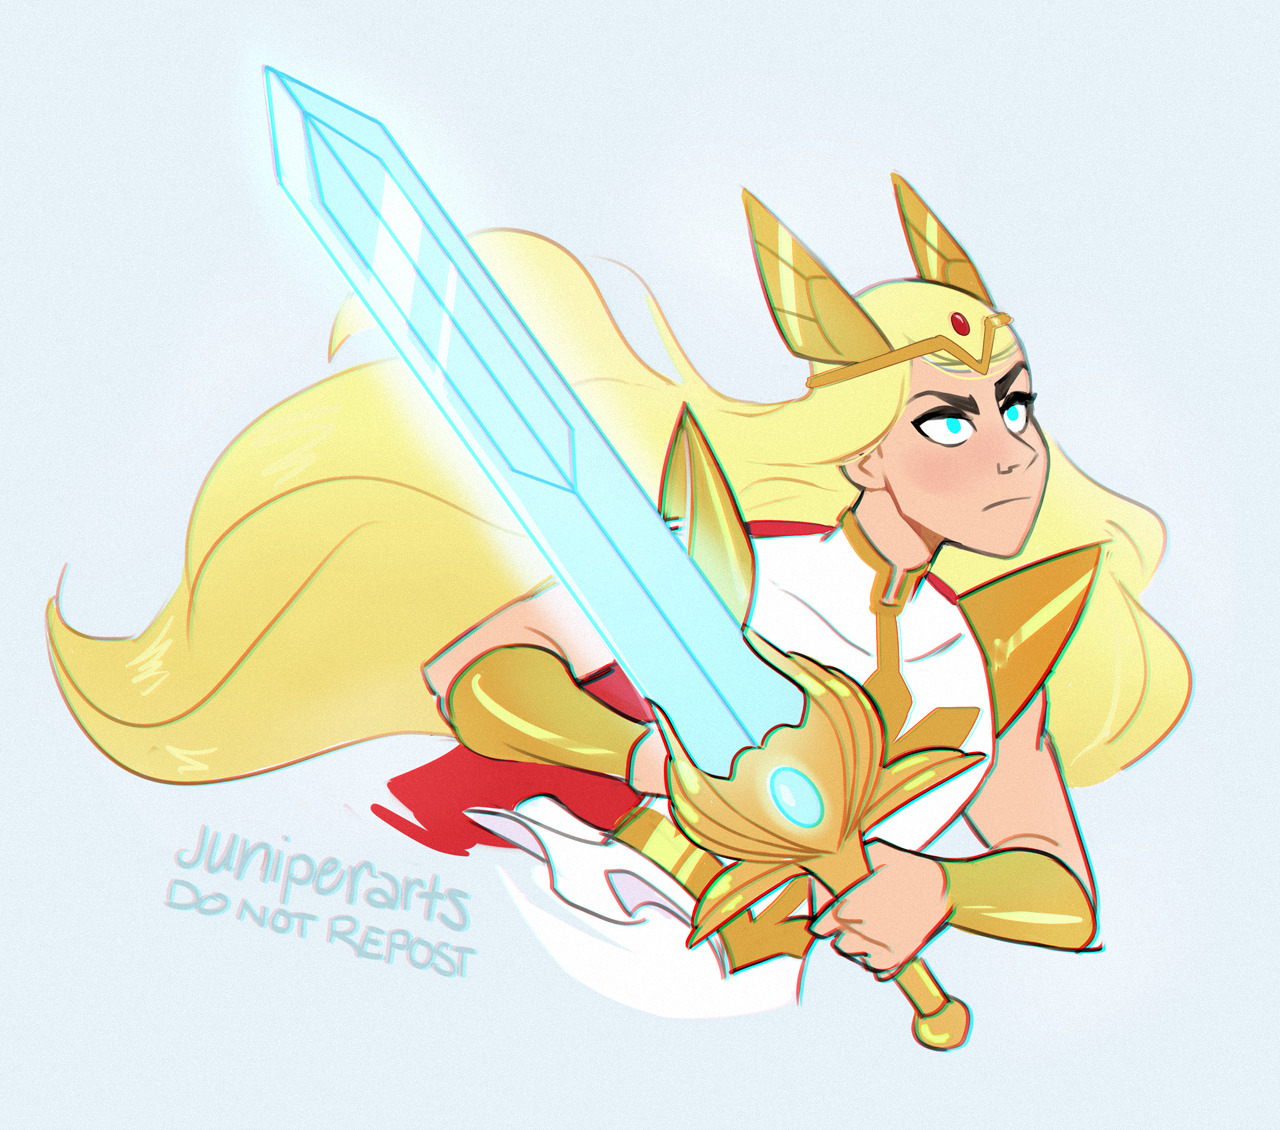 demonofthedeck: juniperarts: The best thing about She-Ra and the Princesses of Power: